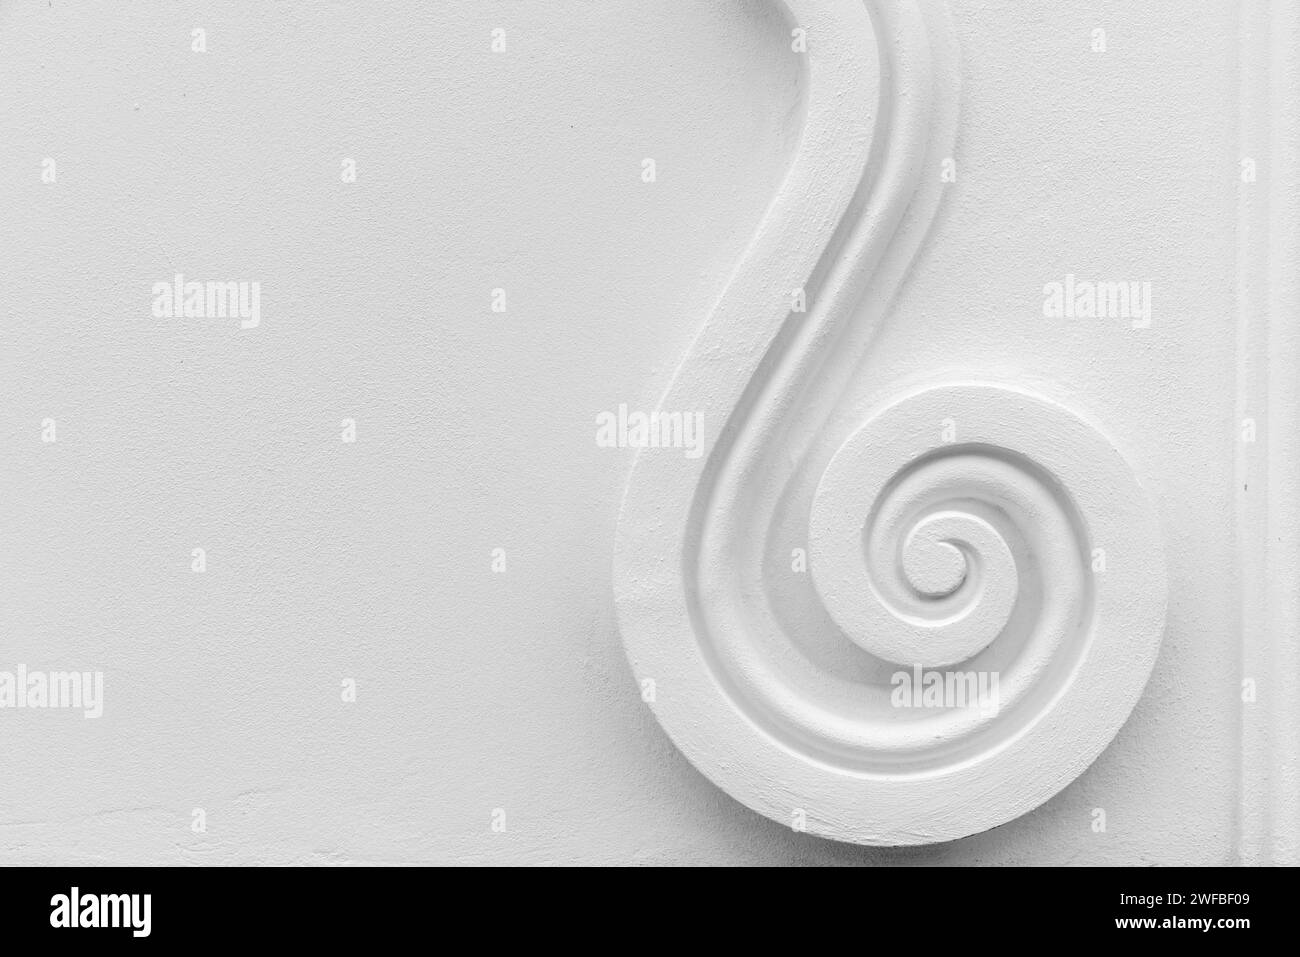 Abstract classic architecture background photo, spiral decoration element over white wall Stock Photo